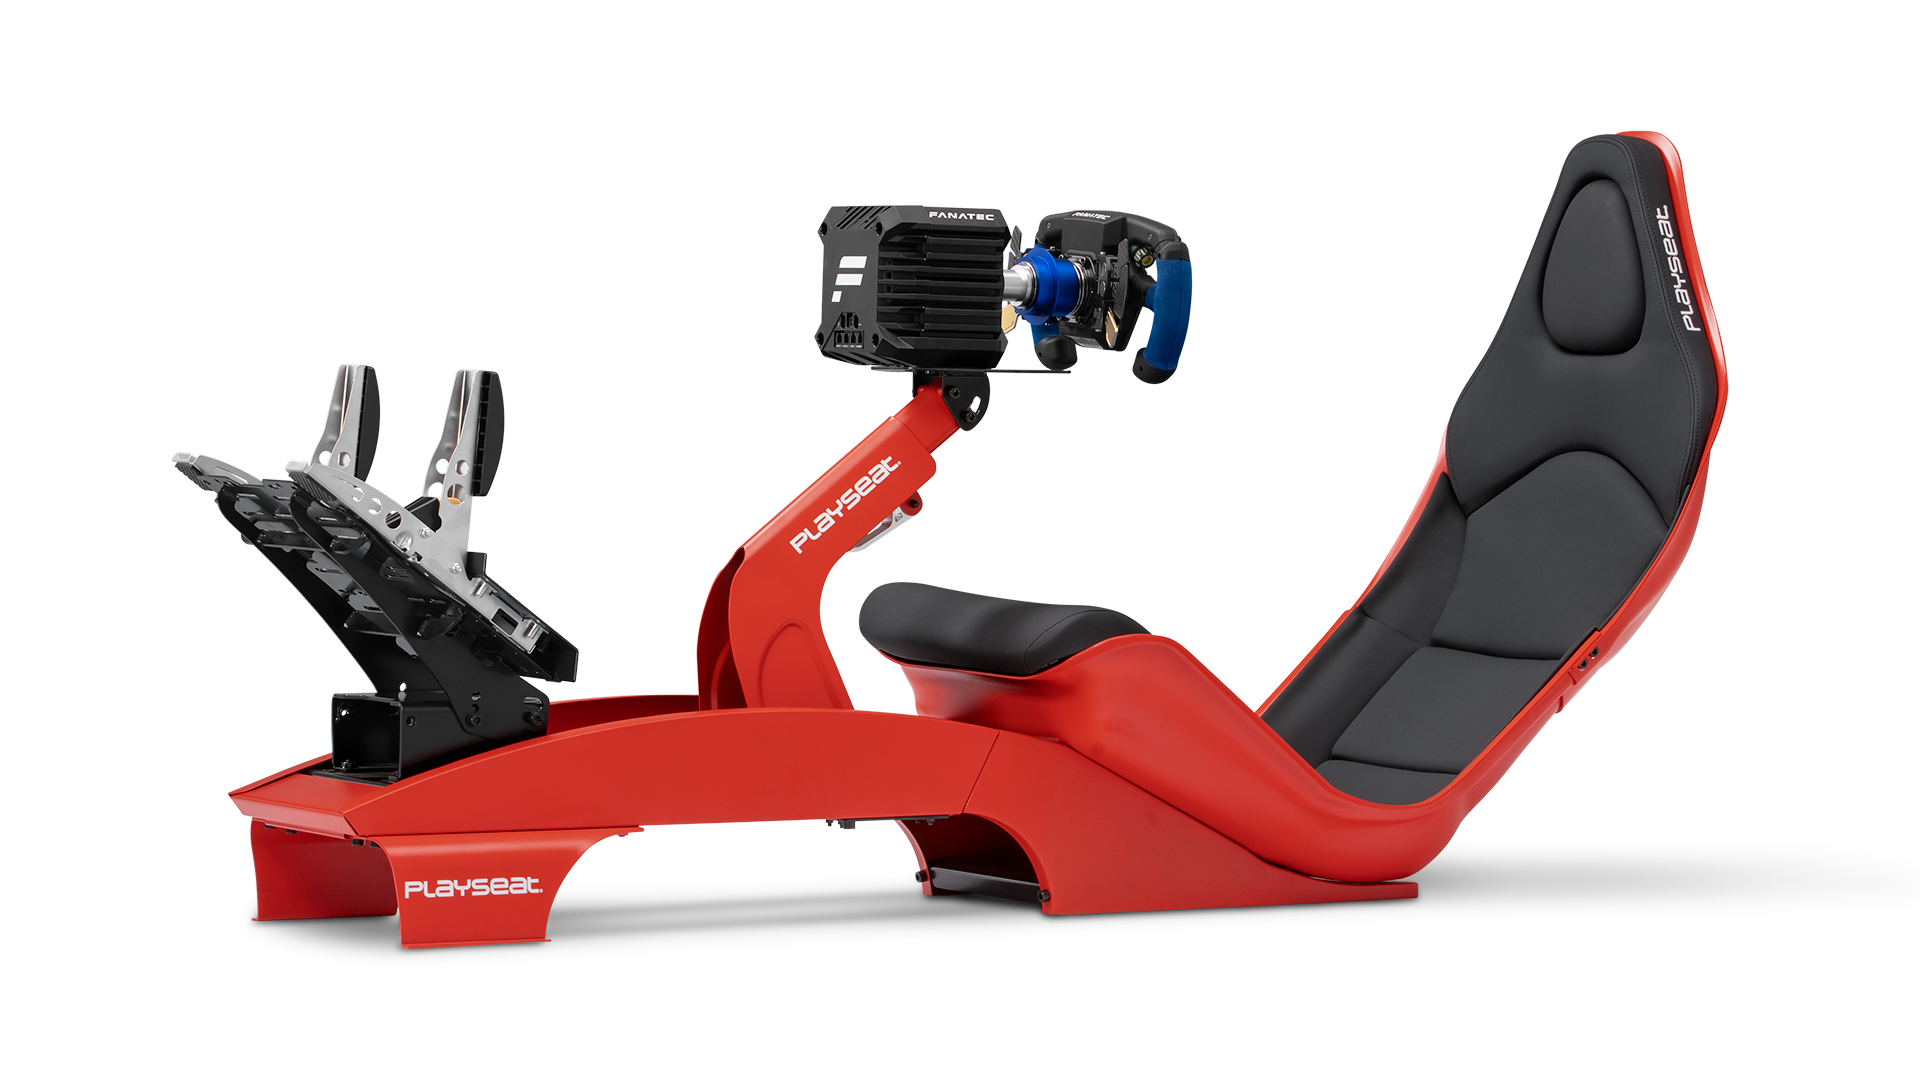 playseat-formula-red-f1-simulator-front-angle-view-fanatec-1920x1080-4.png